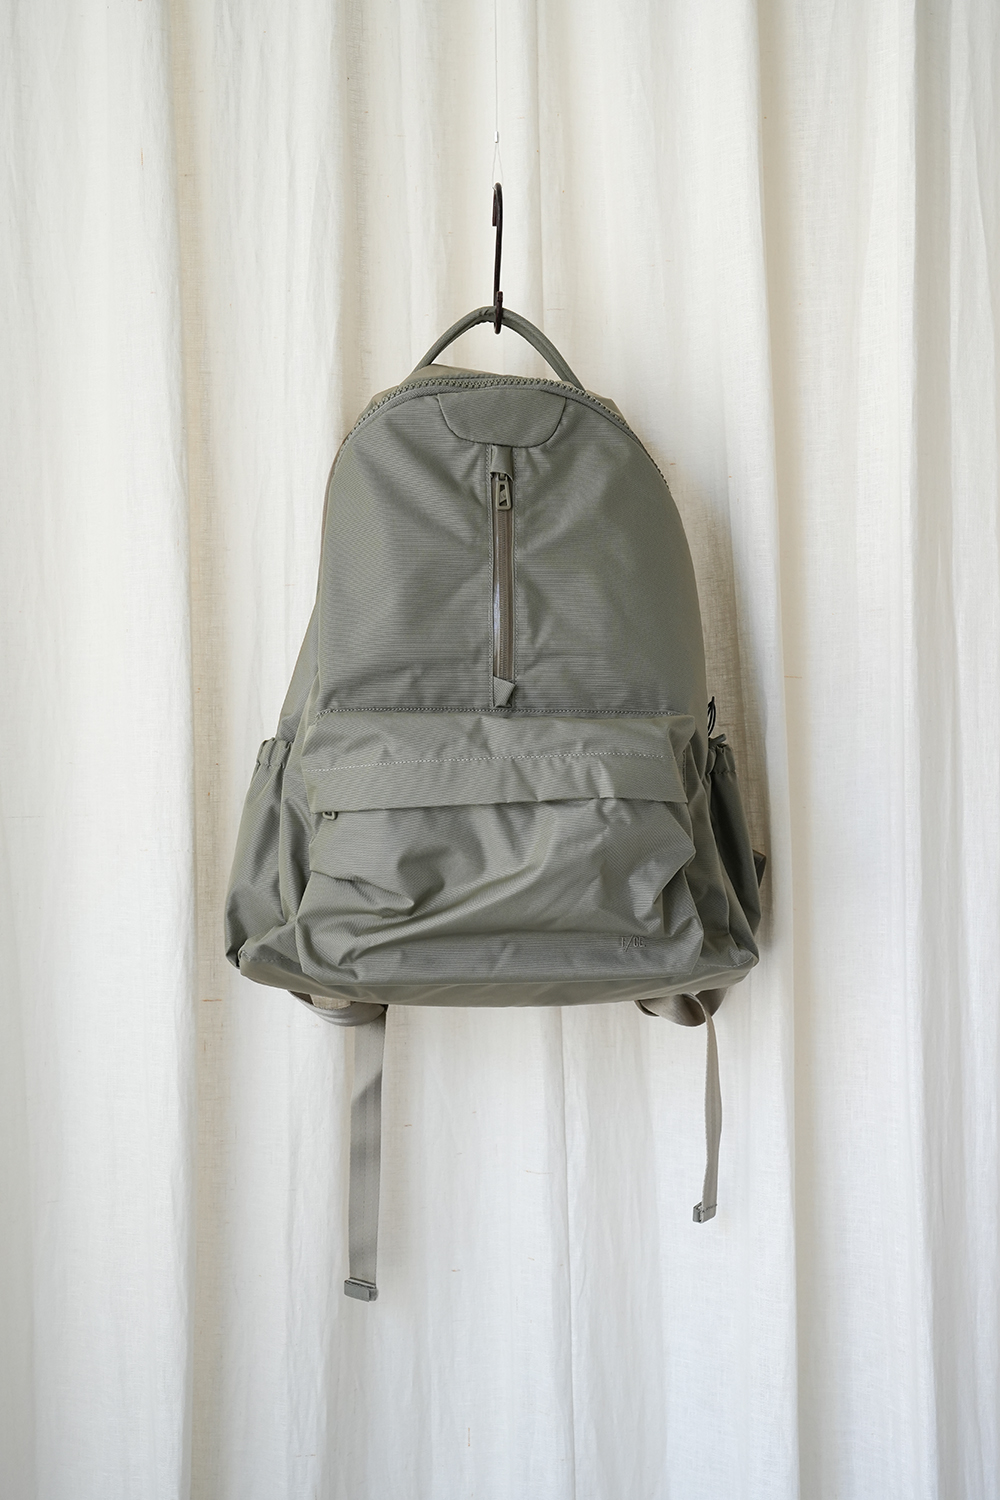 TECHNICAL DAY PACK